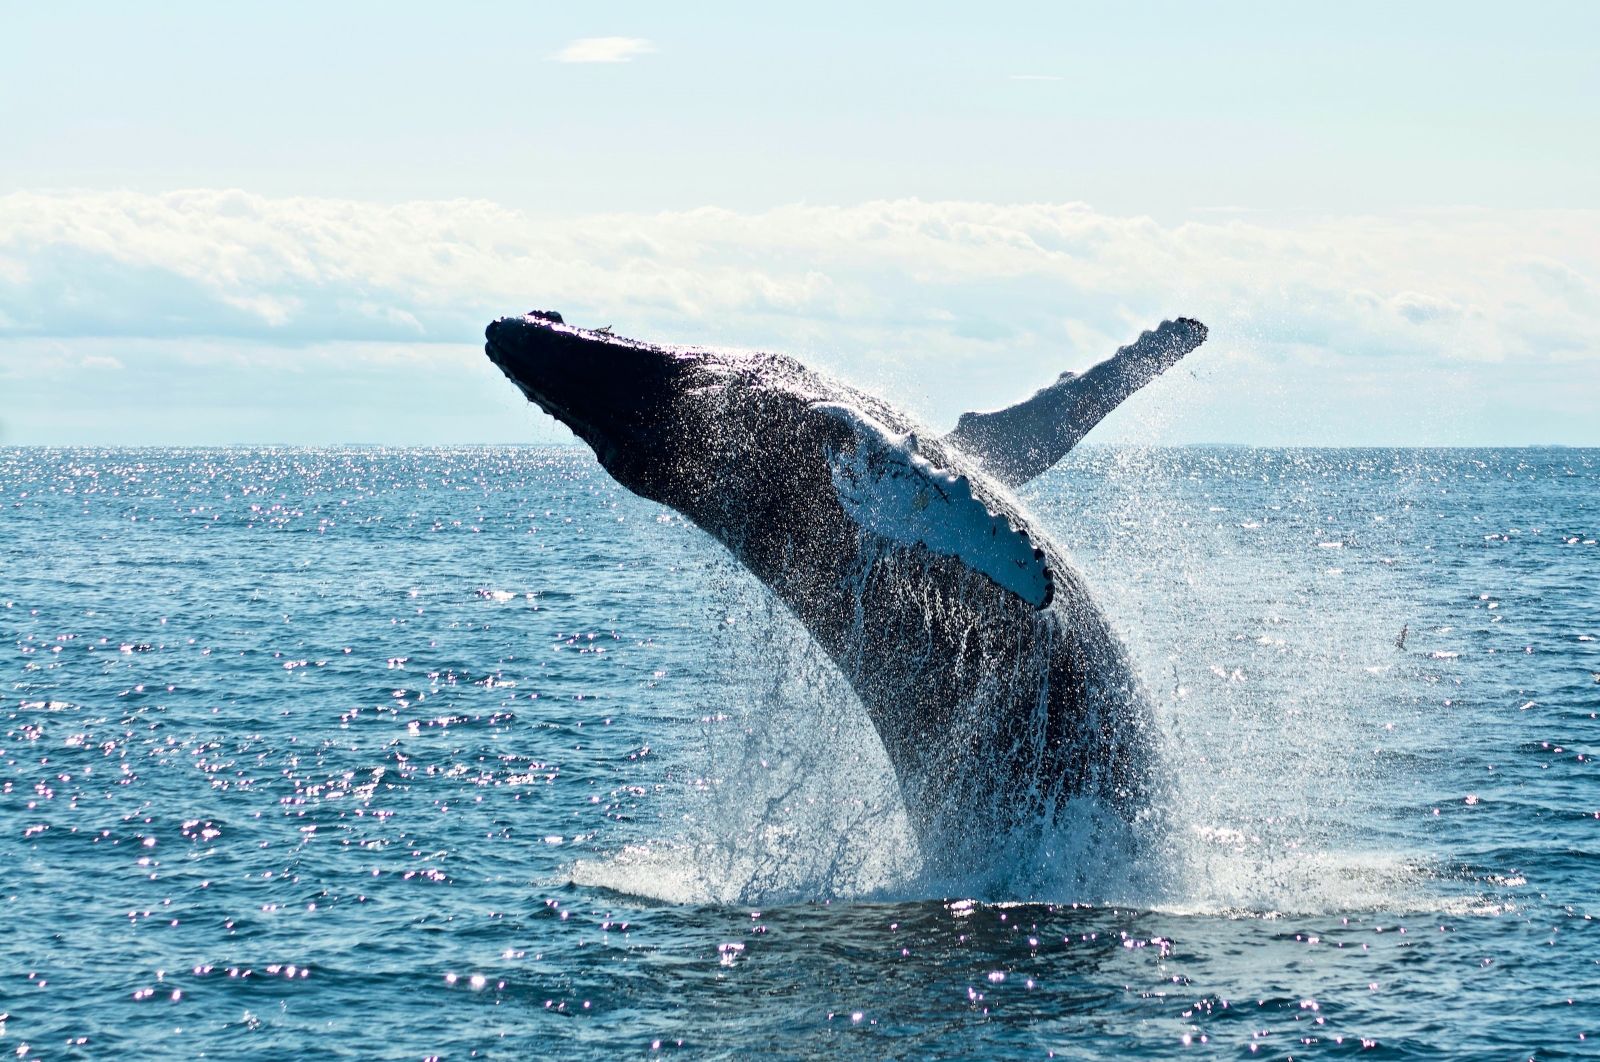 A humpback whale breaching the ocean's surface